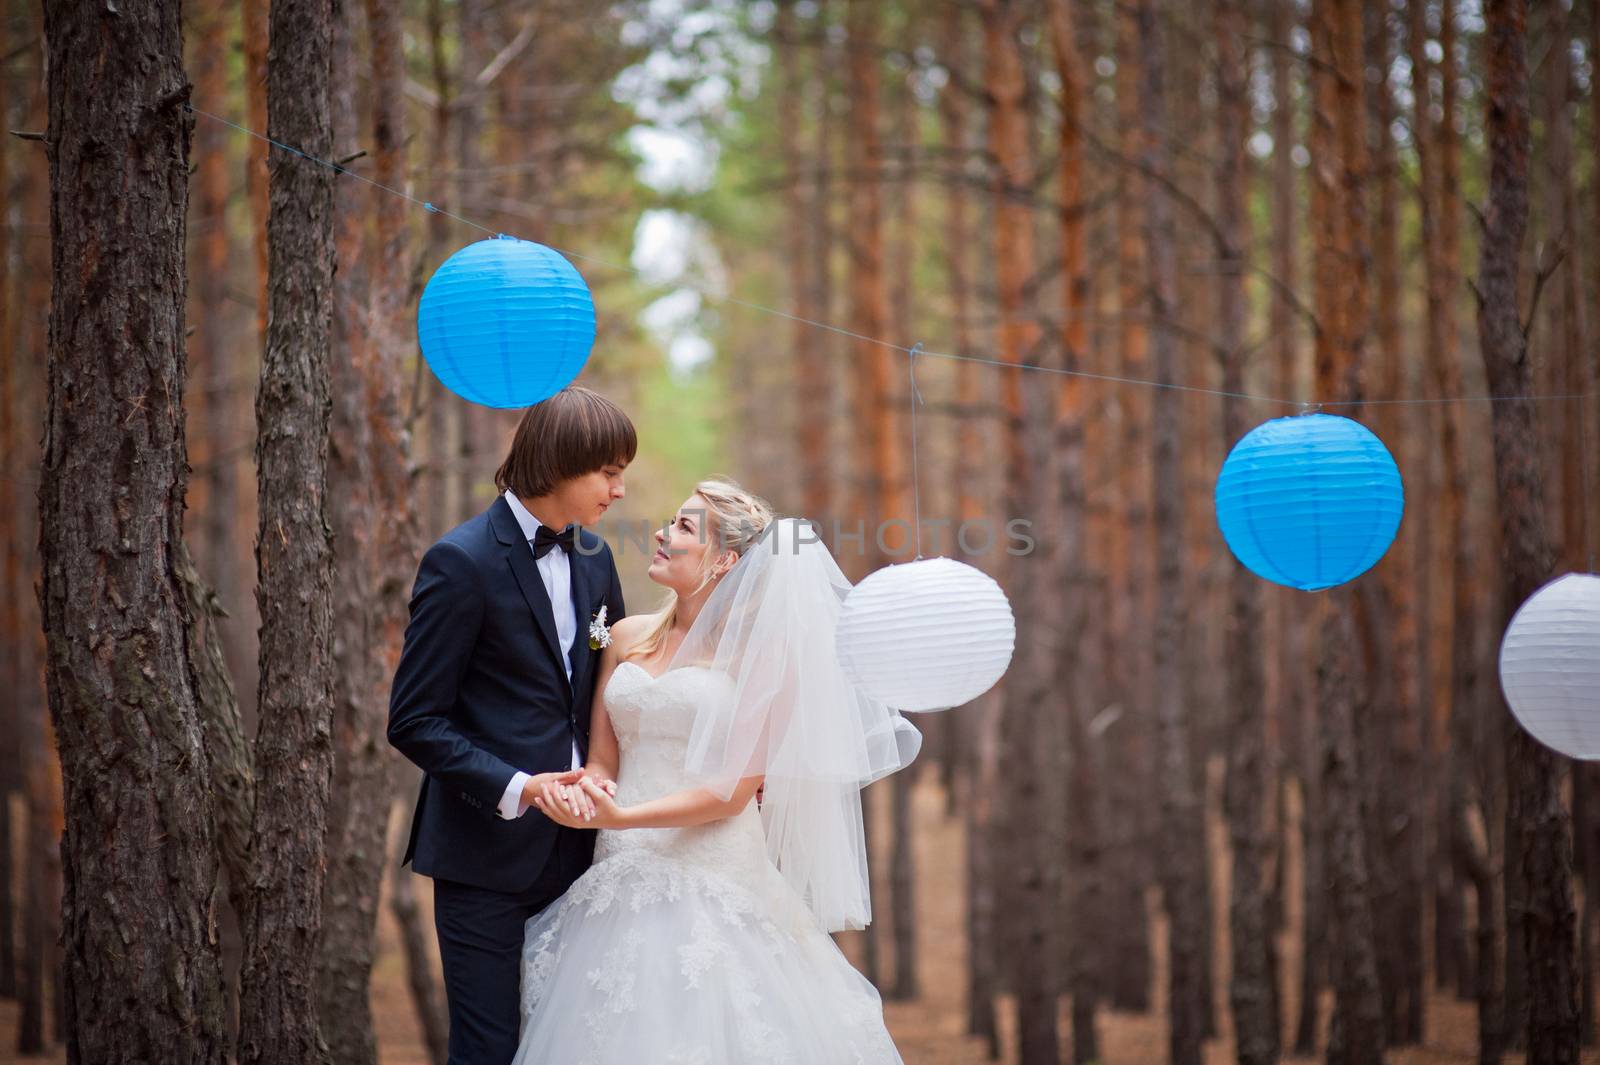 happy bride and groom walking in the autumn forest.